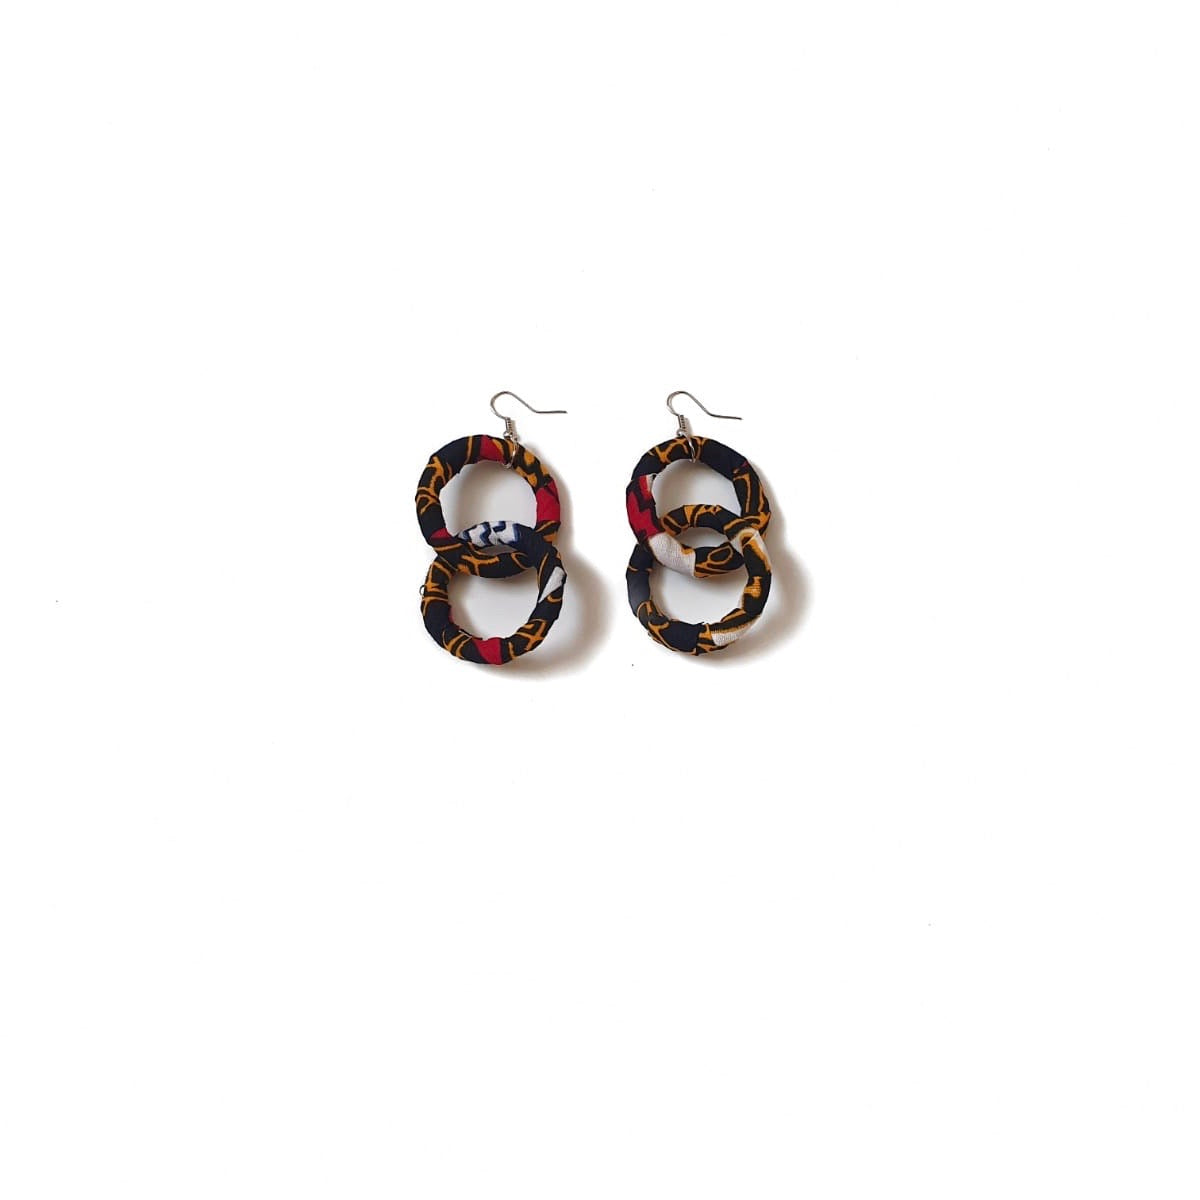 African wax print earrings in a red, black, white and yellow floral pattern on a white background